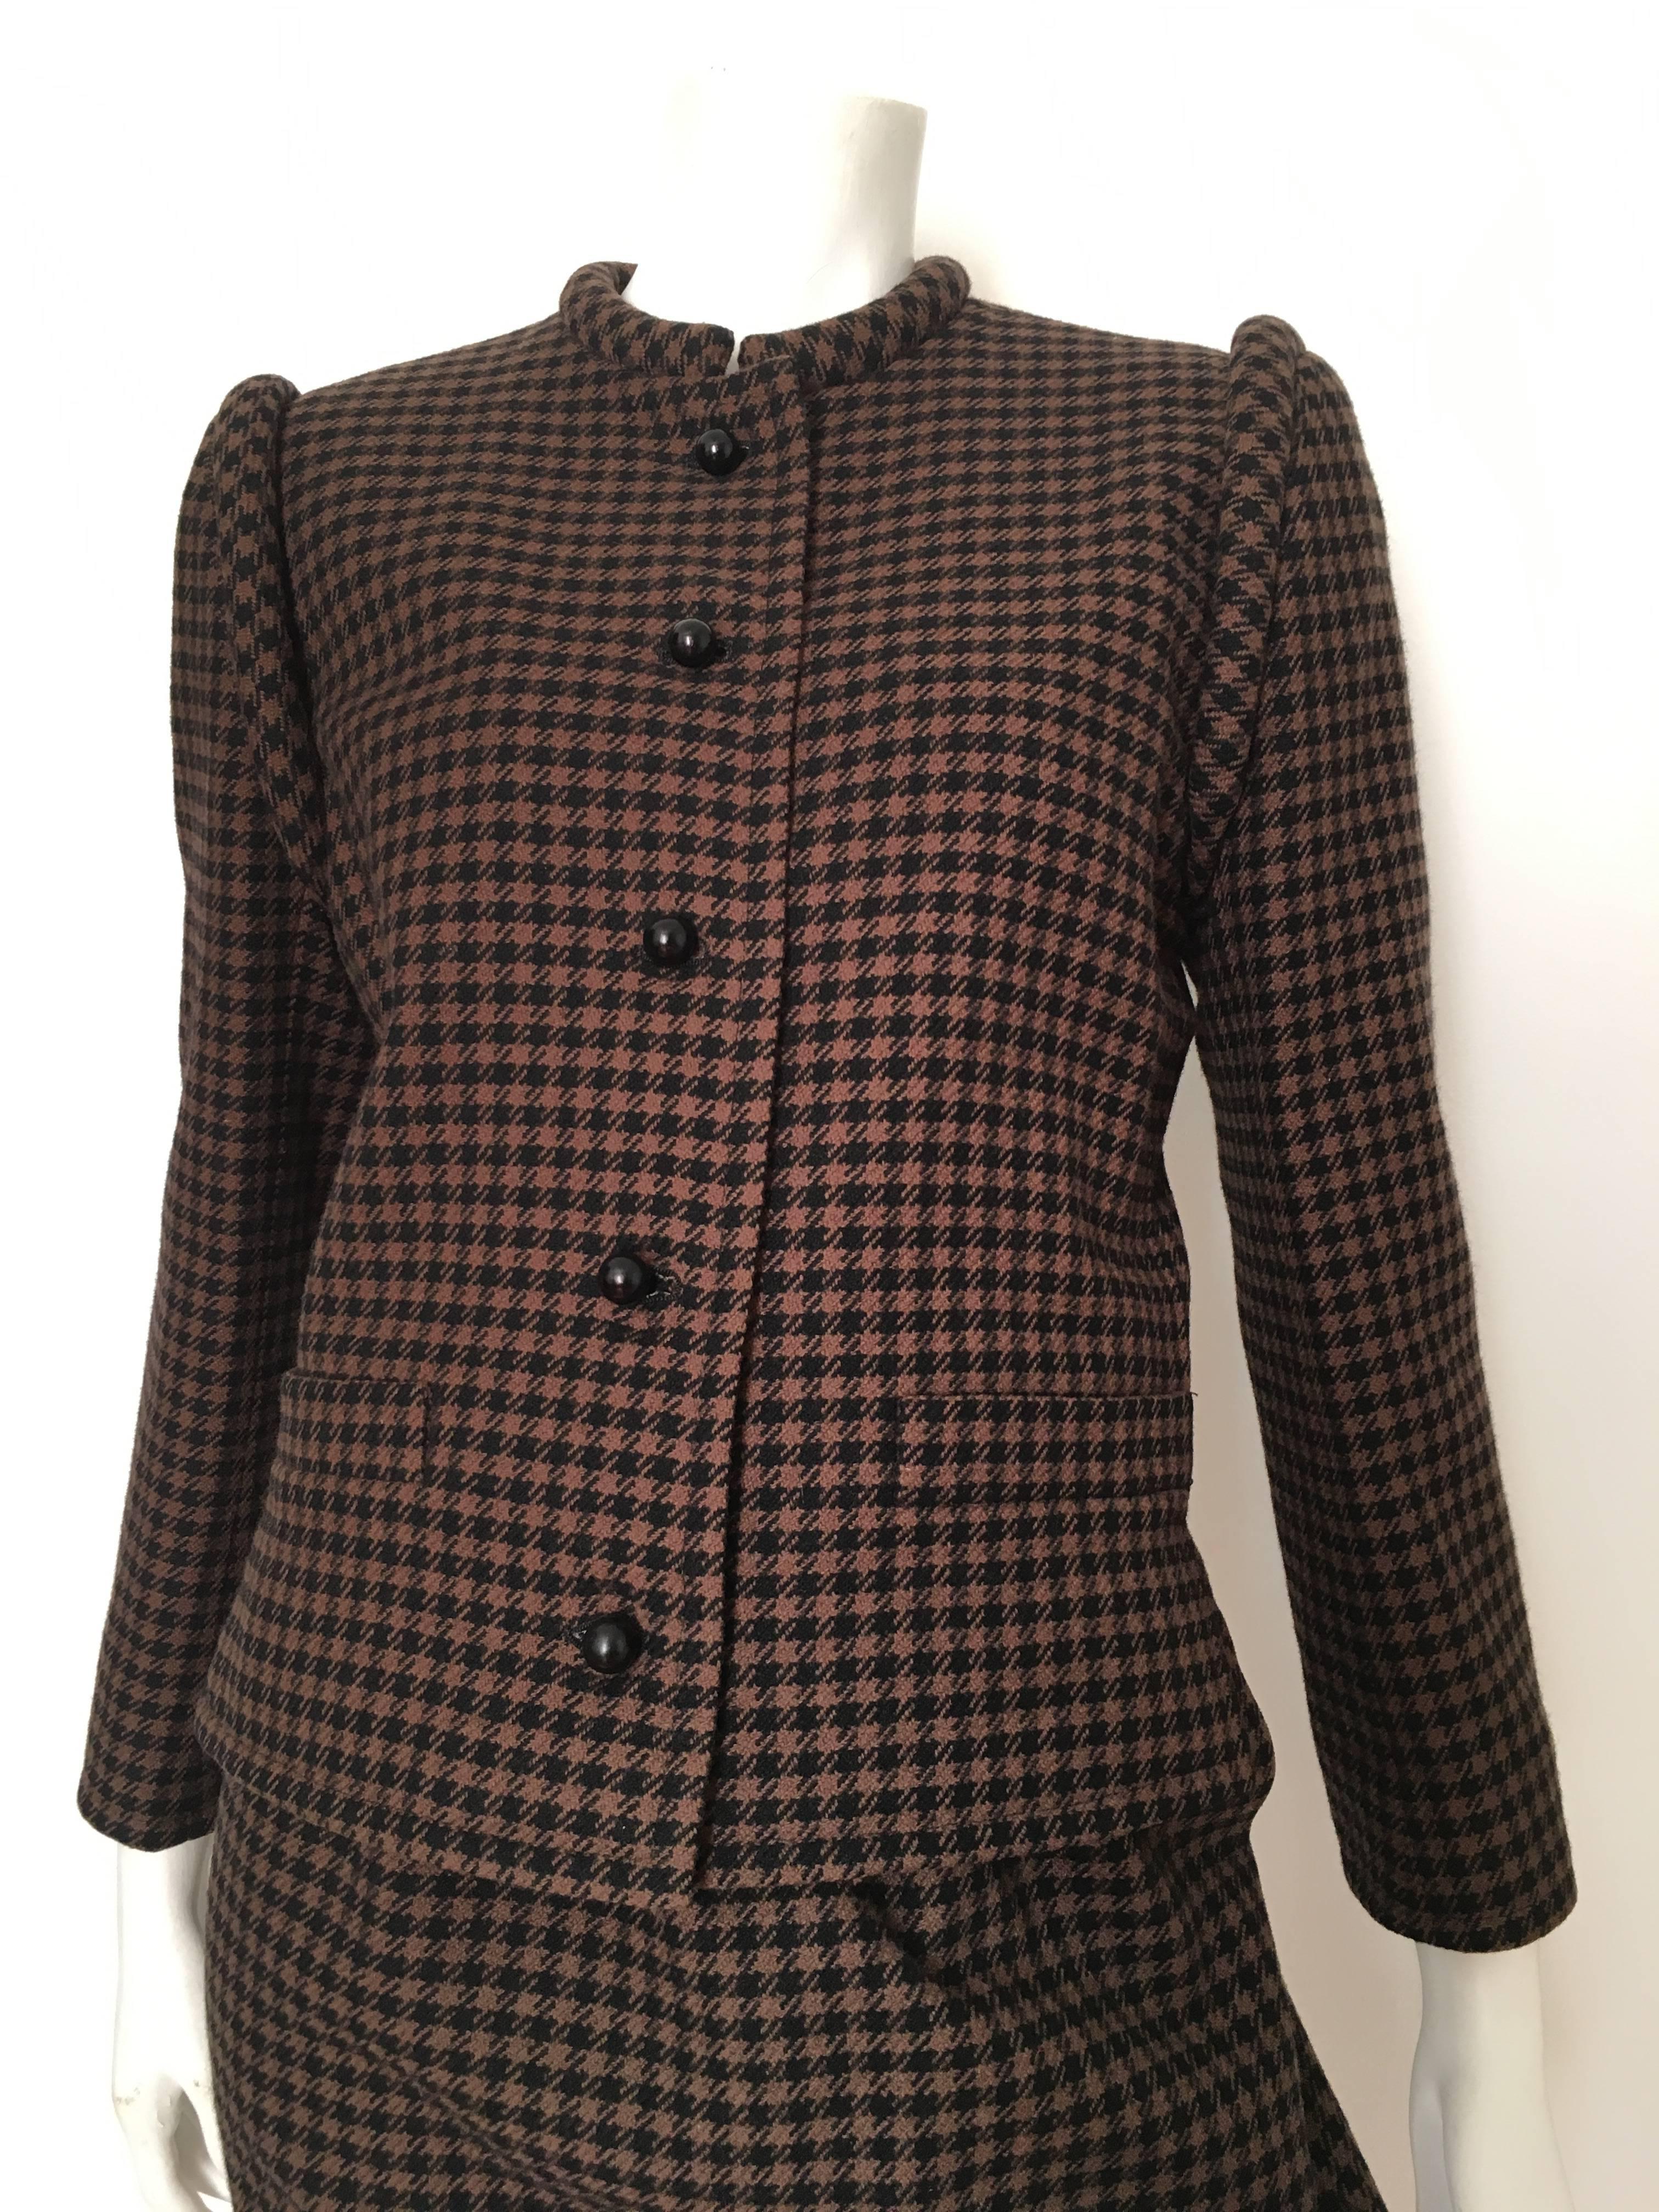 Nina Ricci Boutique 1970s wool brown & black houndstooth pattern jacket & skirt set fits like an USA size 6.  Ladies please grab your trusted best friend, Mr. Tape Measure, so you can properly measure your bust, waist, hips and sleeves to make